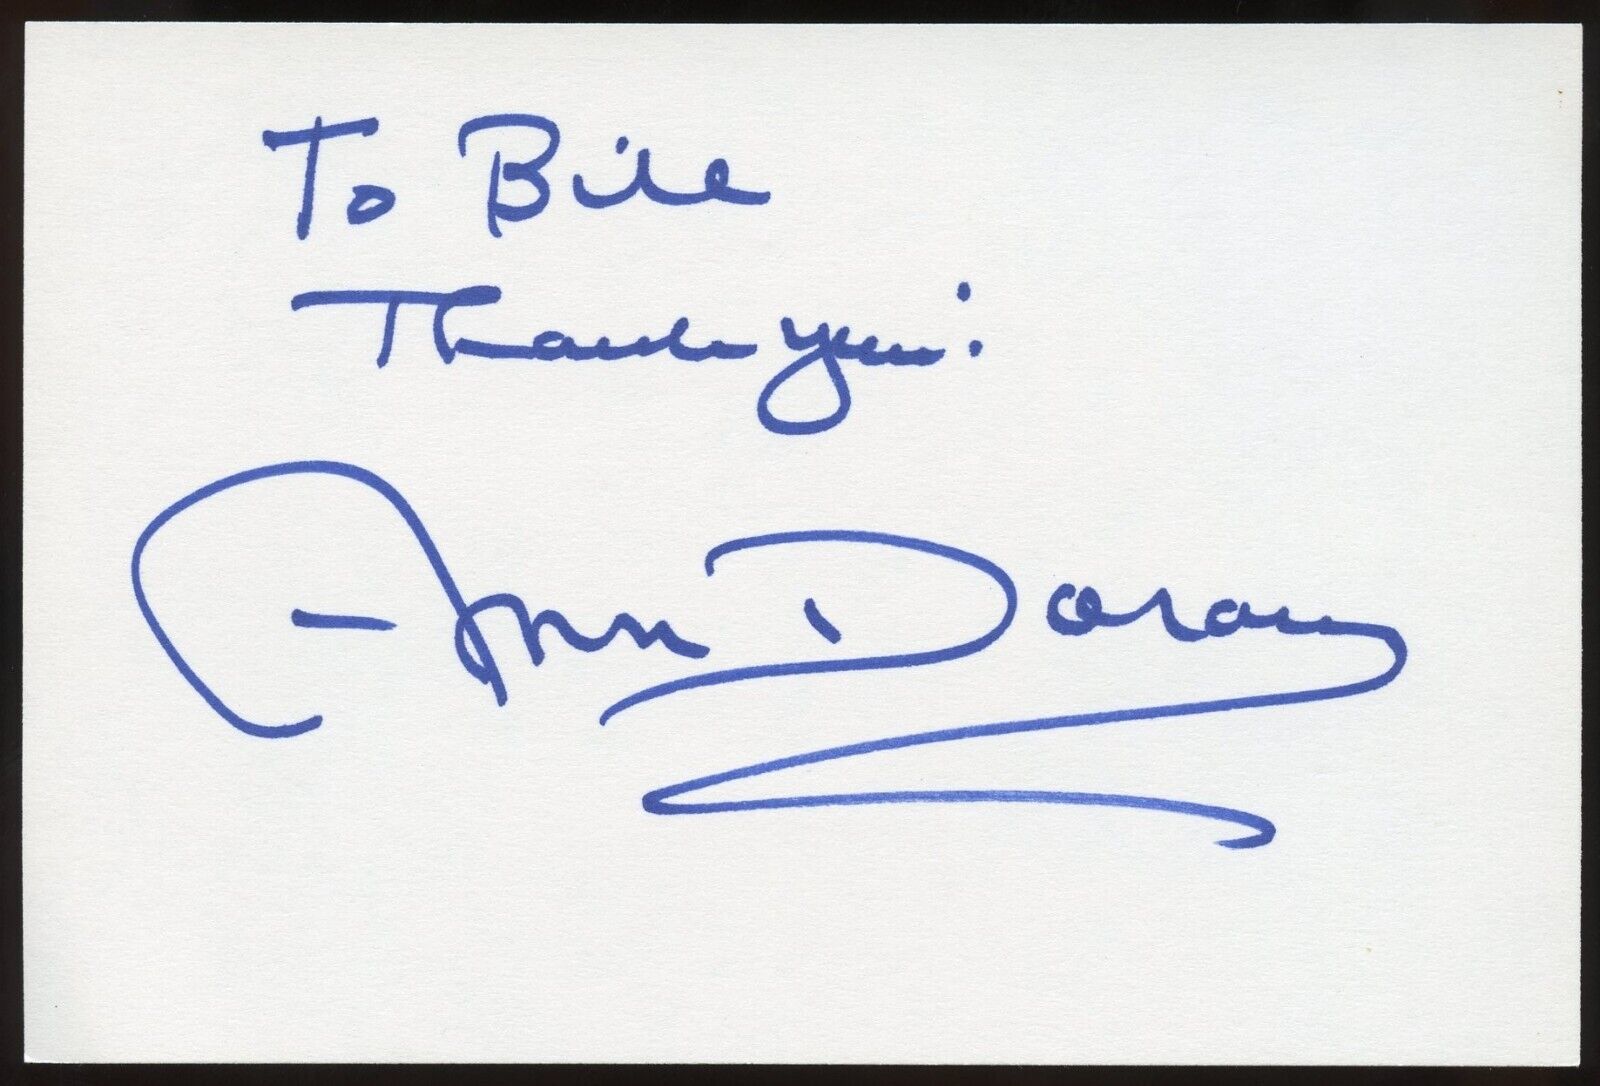 Ann Doran d2000 signed autograph auto 4x5 Cut Actress in Rebel Without a Cause